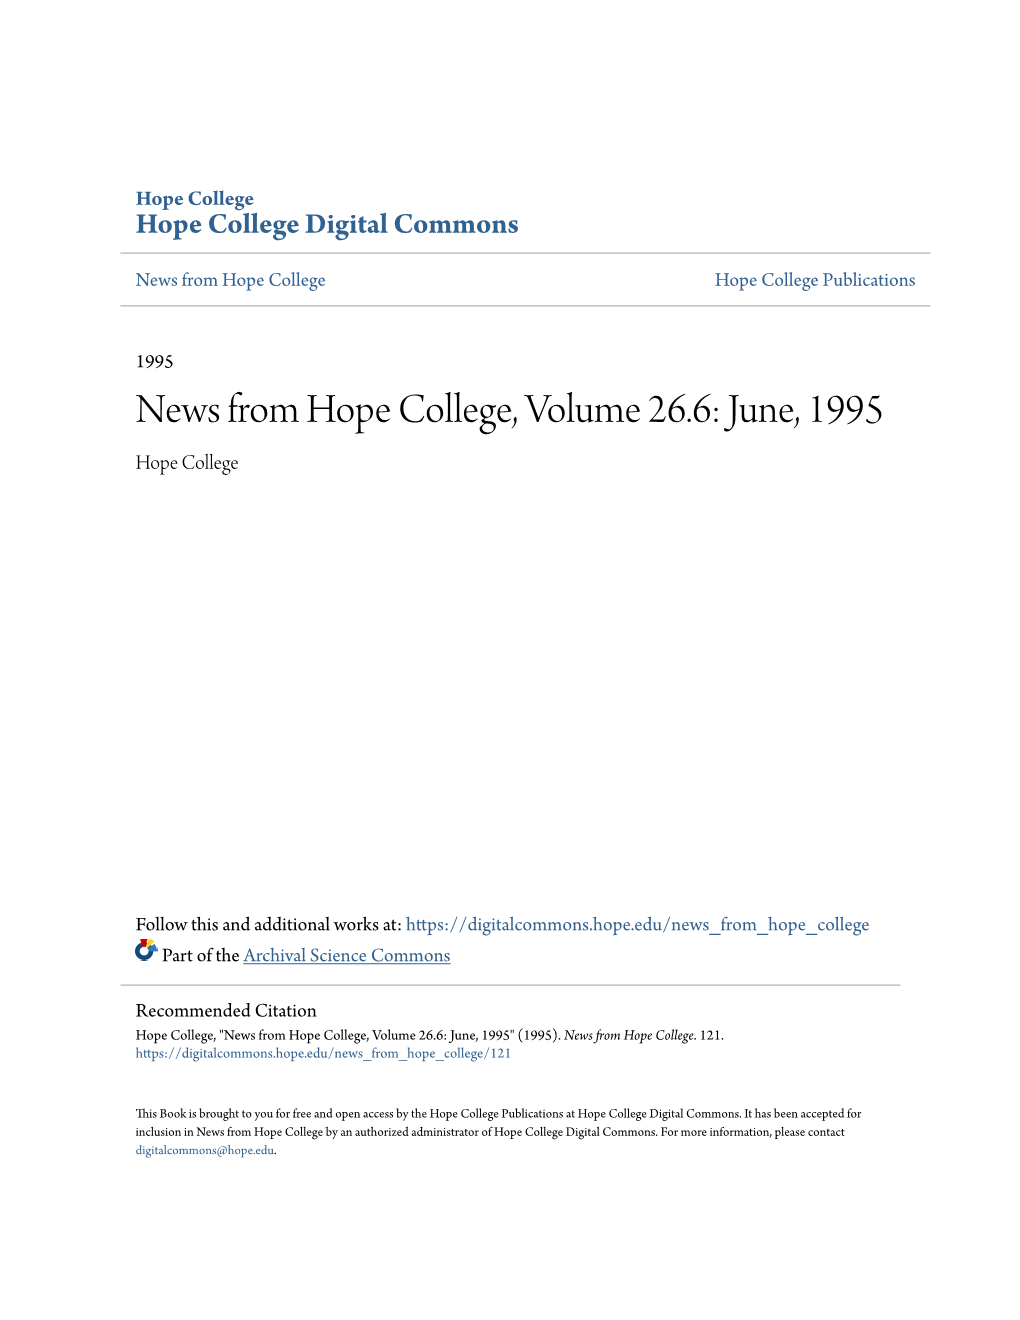 News from Hope College, Volume 26.6: June, 1995 Hope College